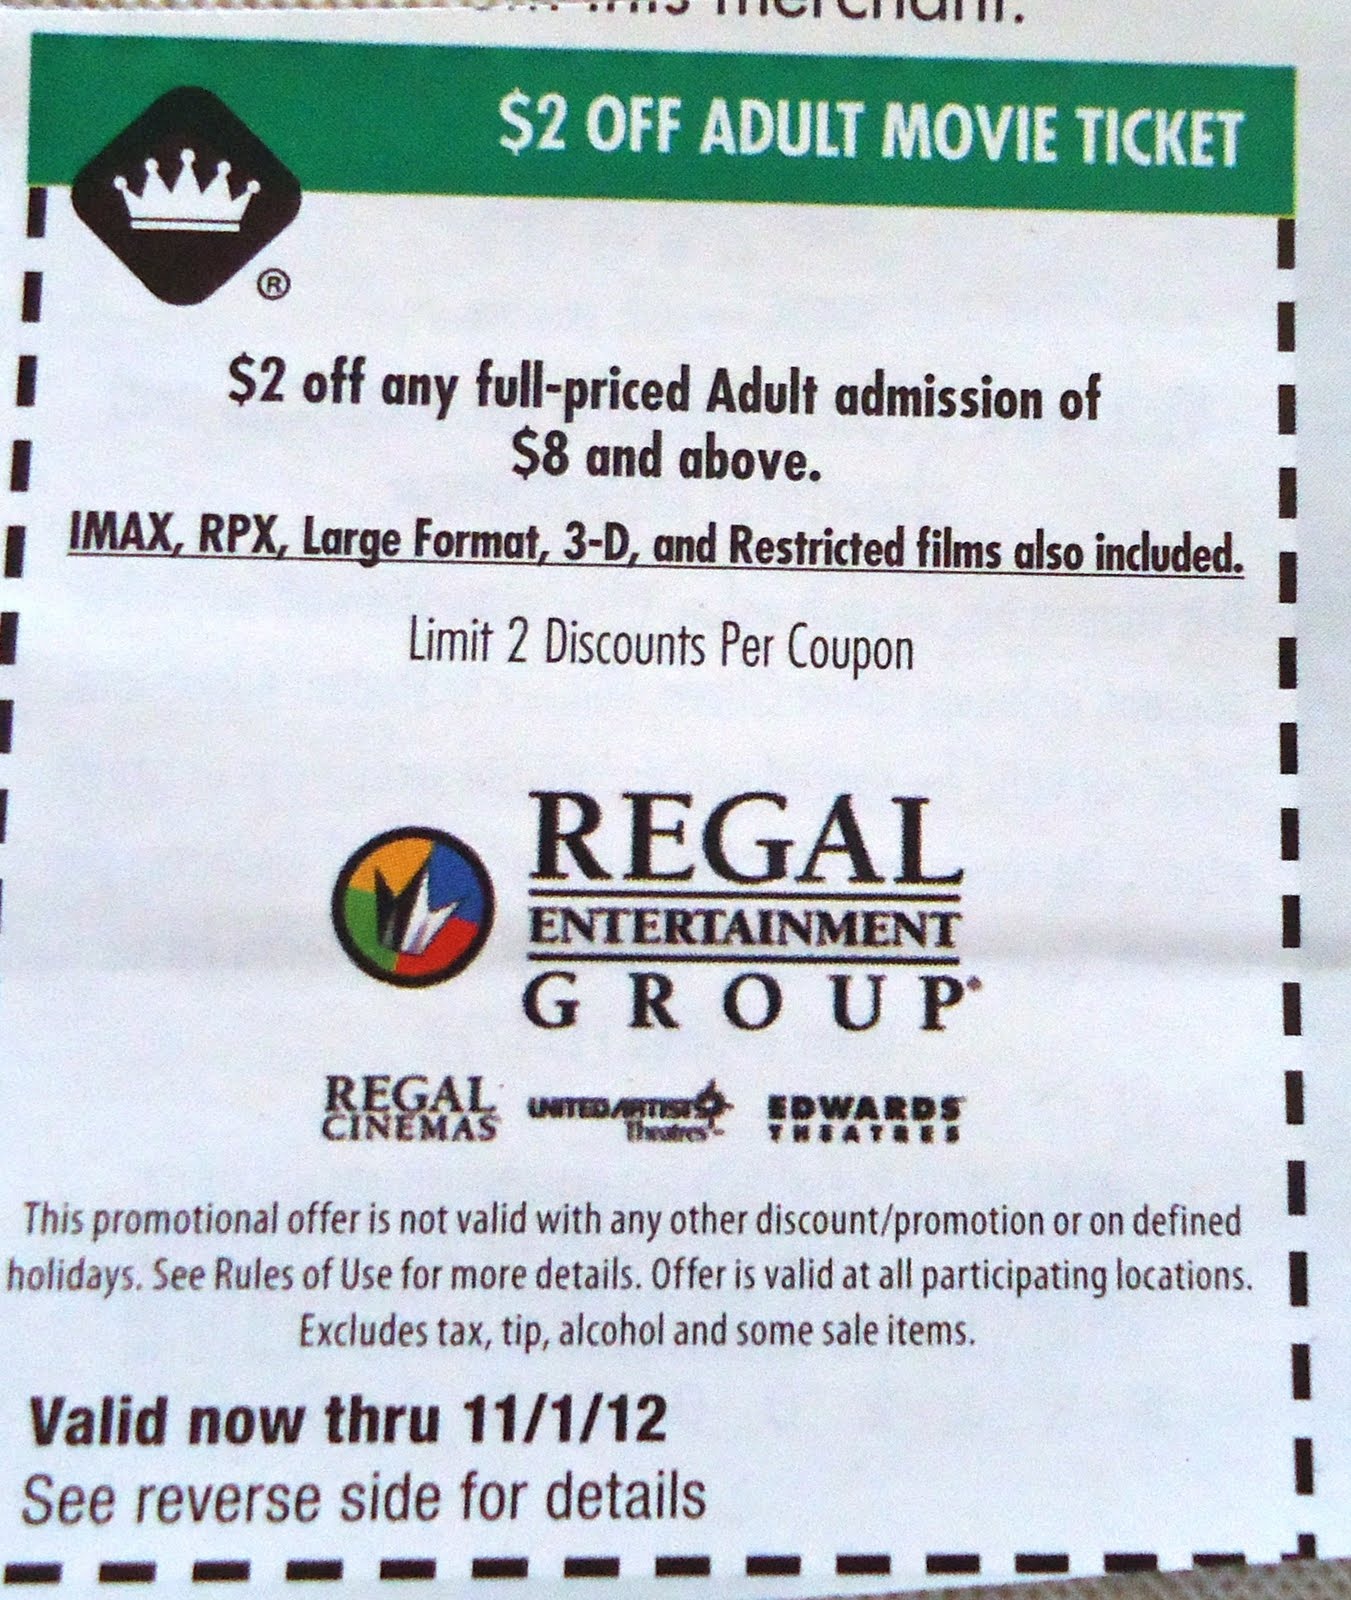 Regal Popcorn Coupon July 2018 : Harcourt Outlines Coupons - Regal Cinema Free Popcorn Printable Coupons